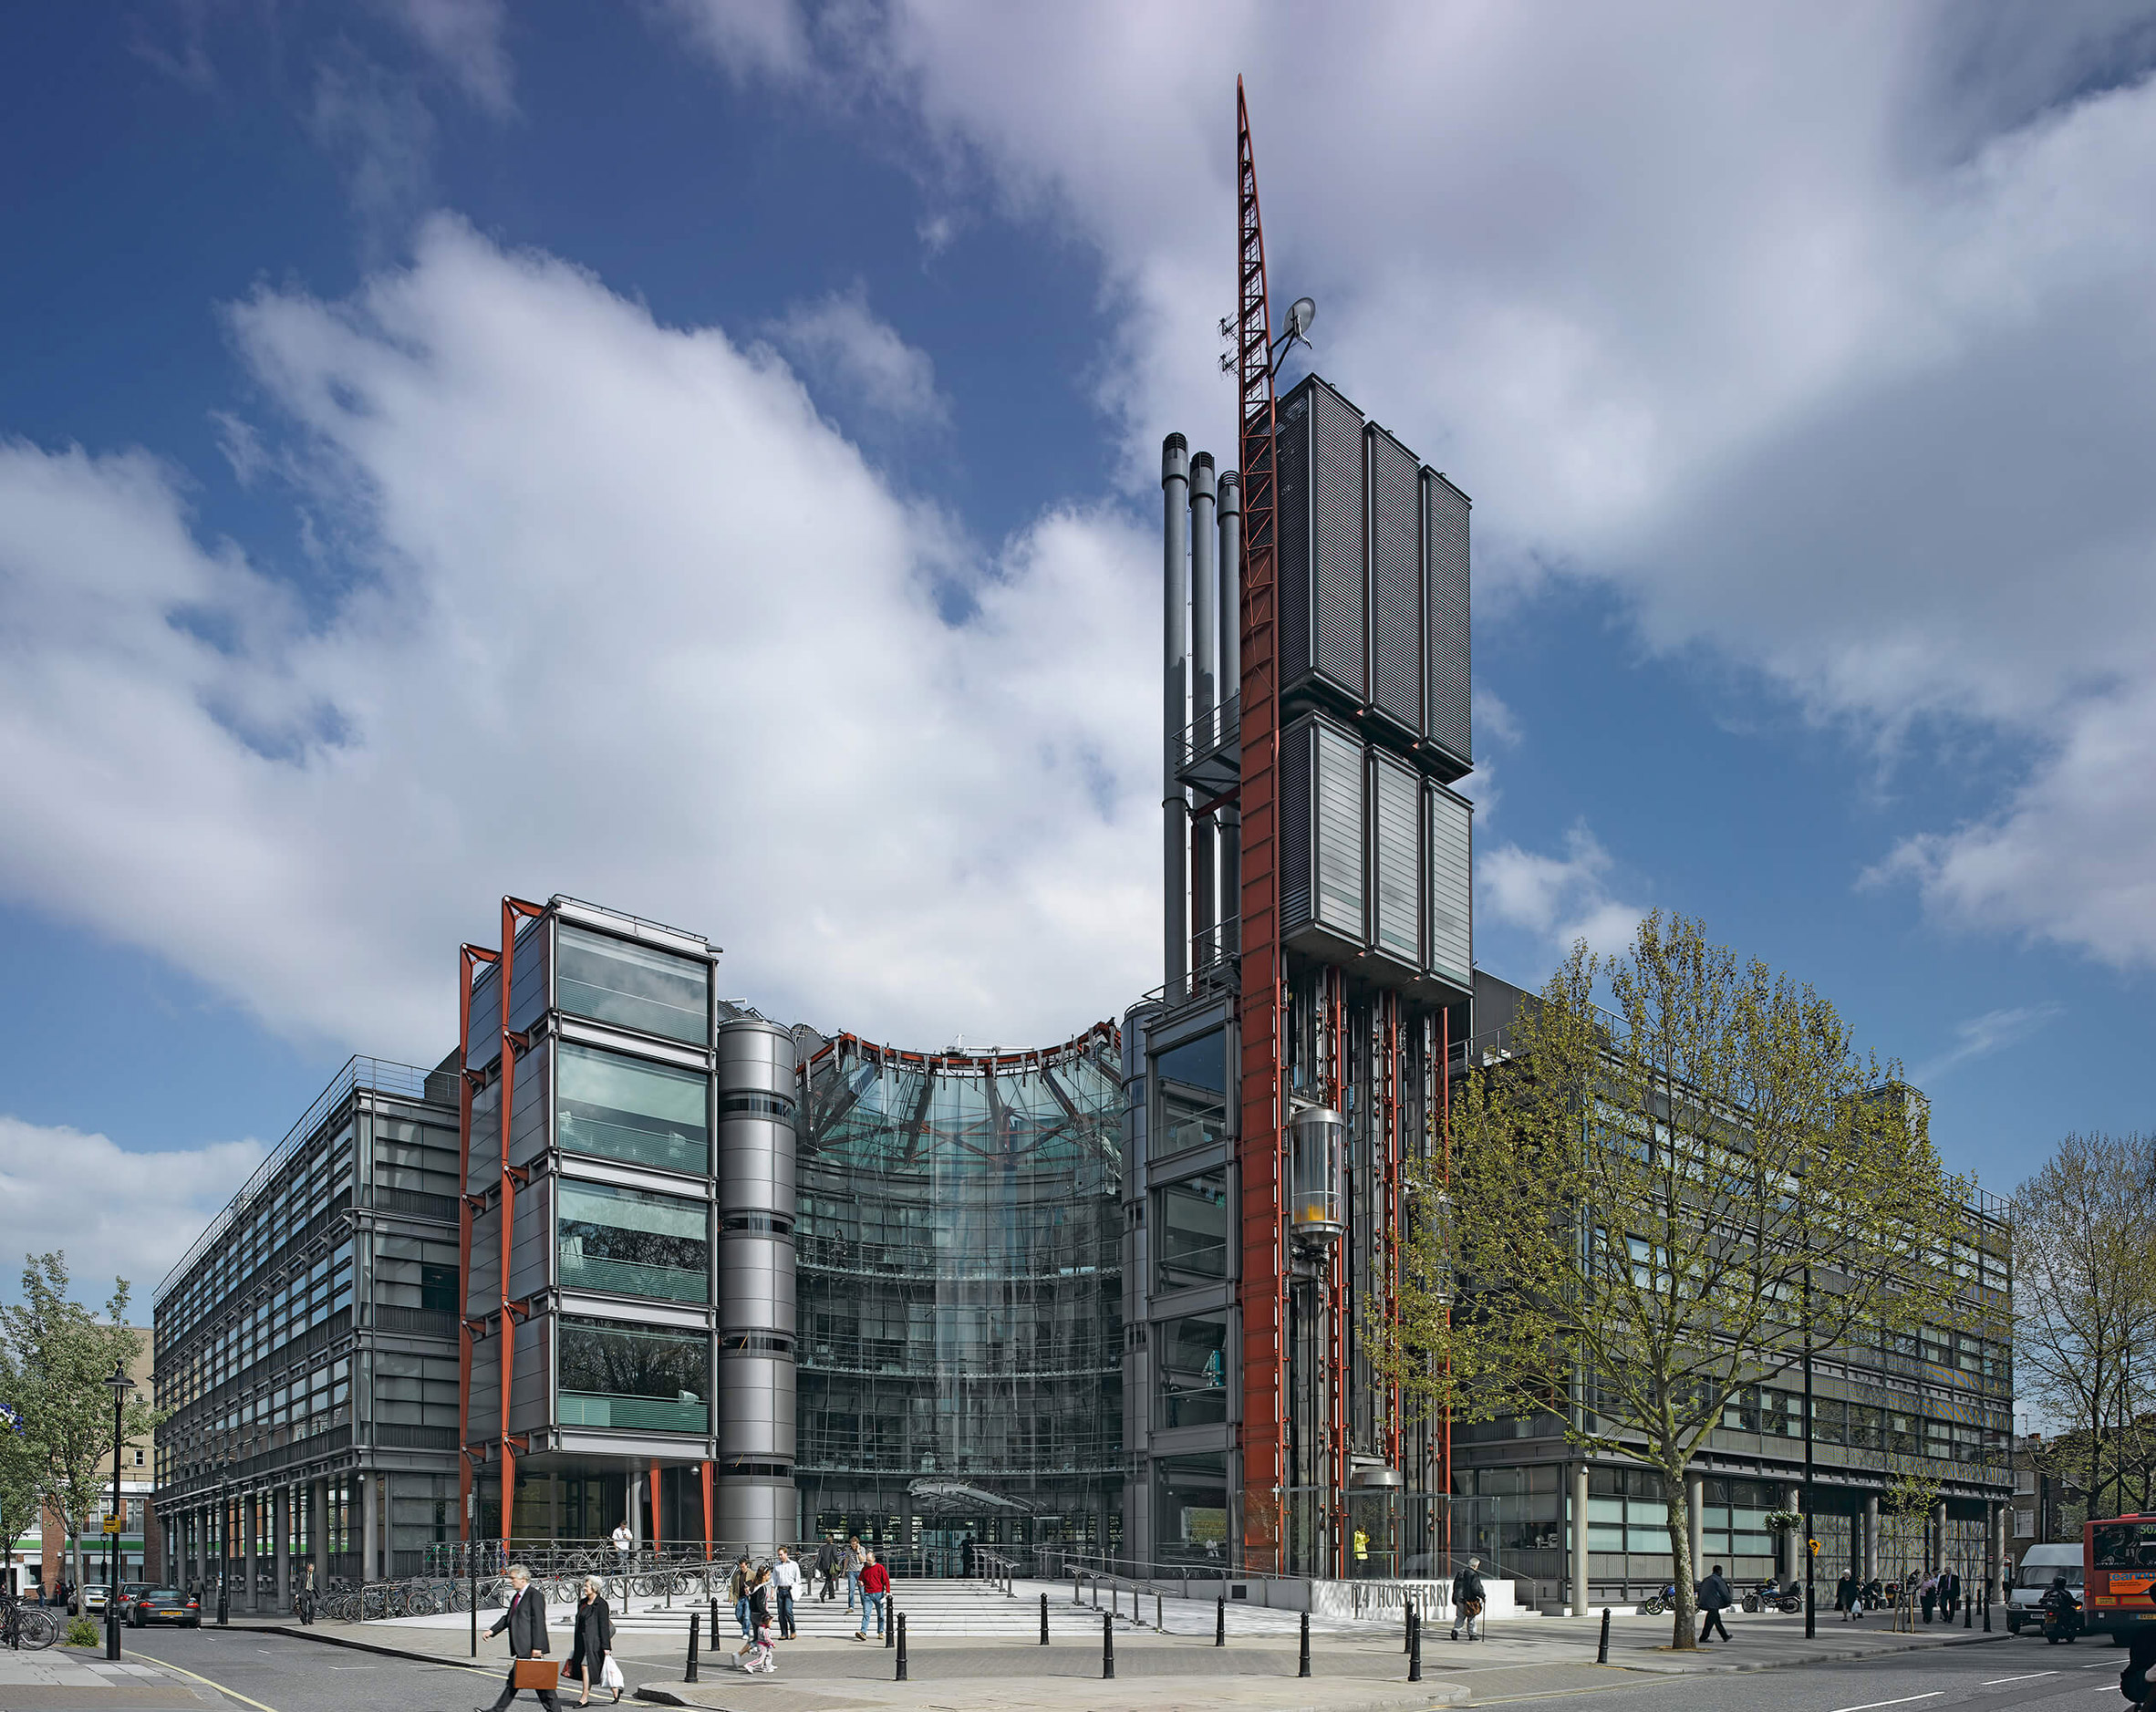 Channel 4 headquarters by Richard Rogers features on The Risk List by C20 Society